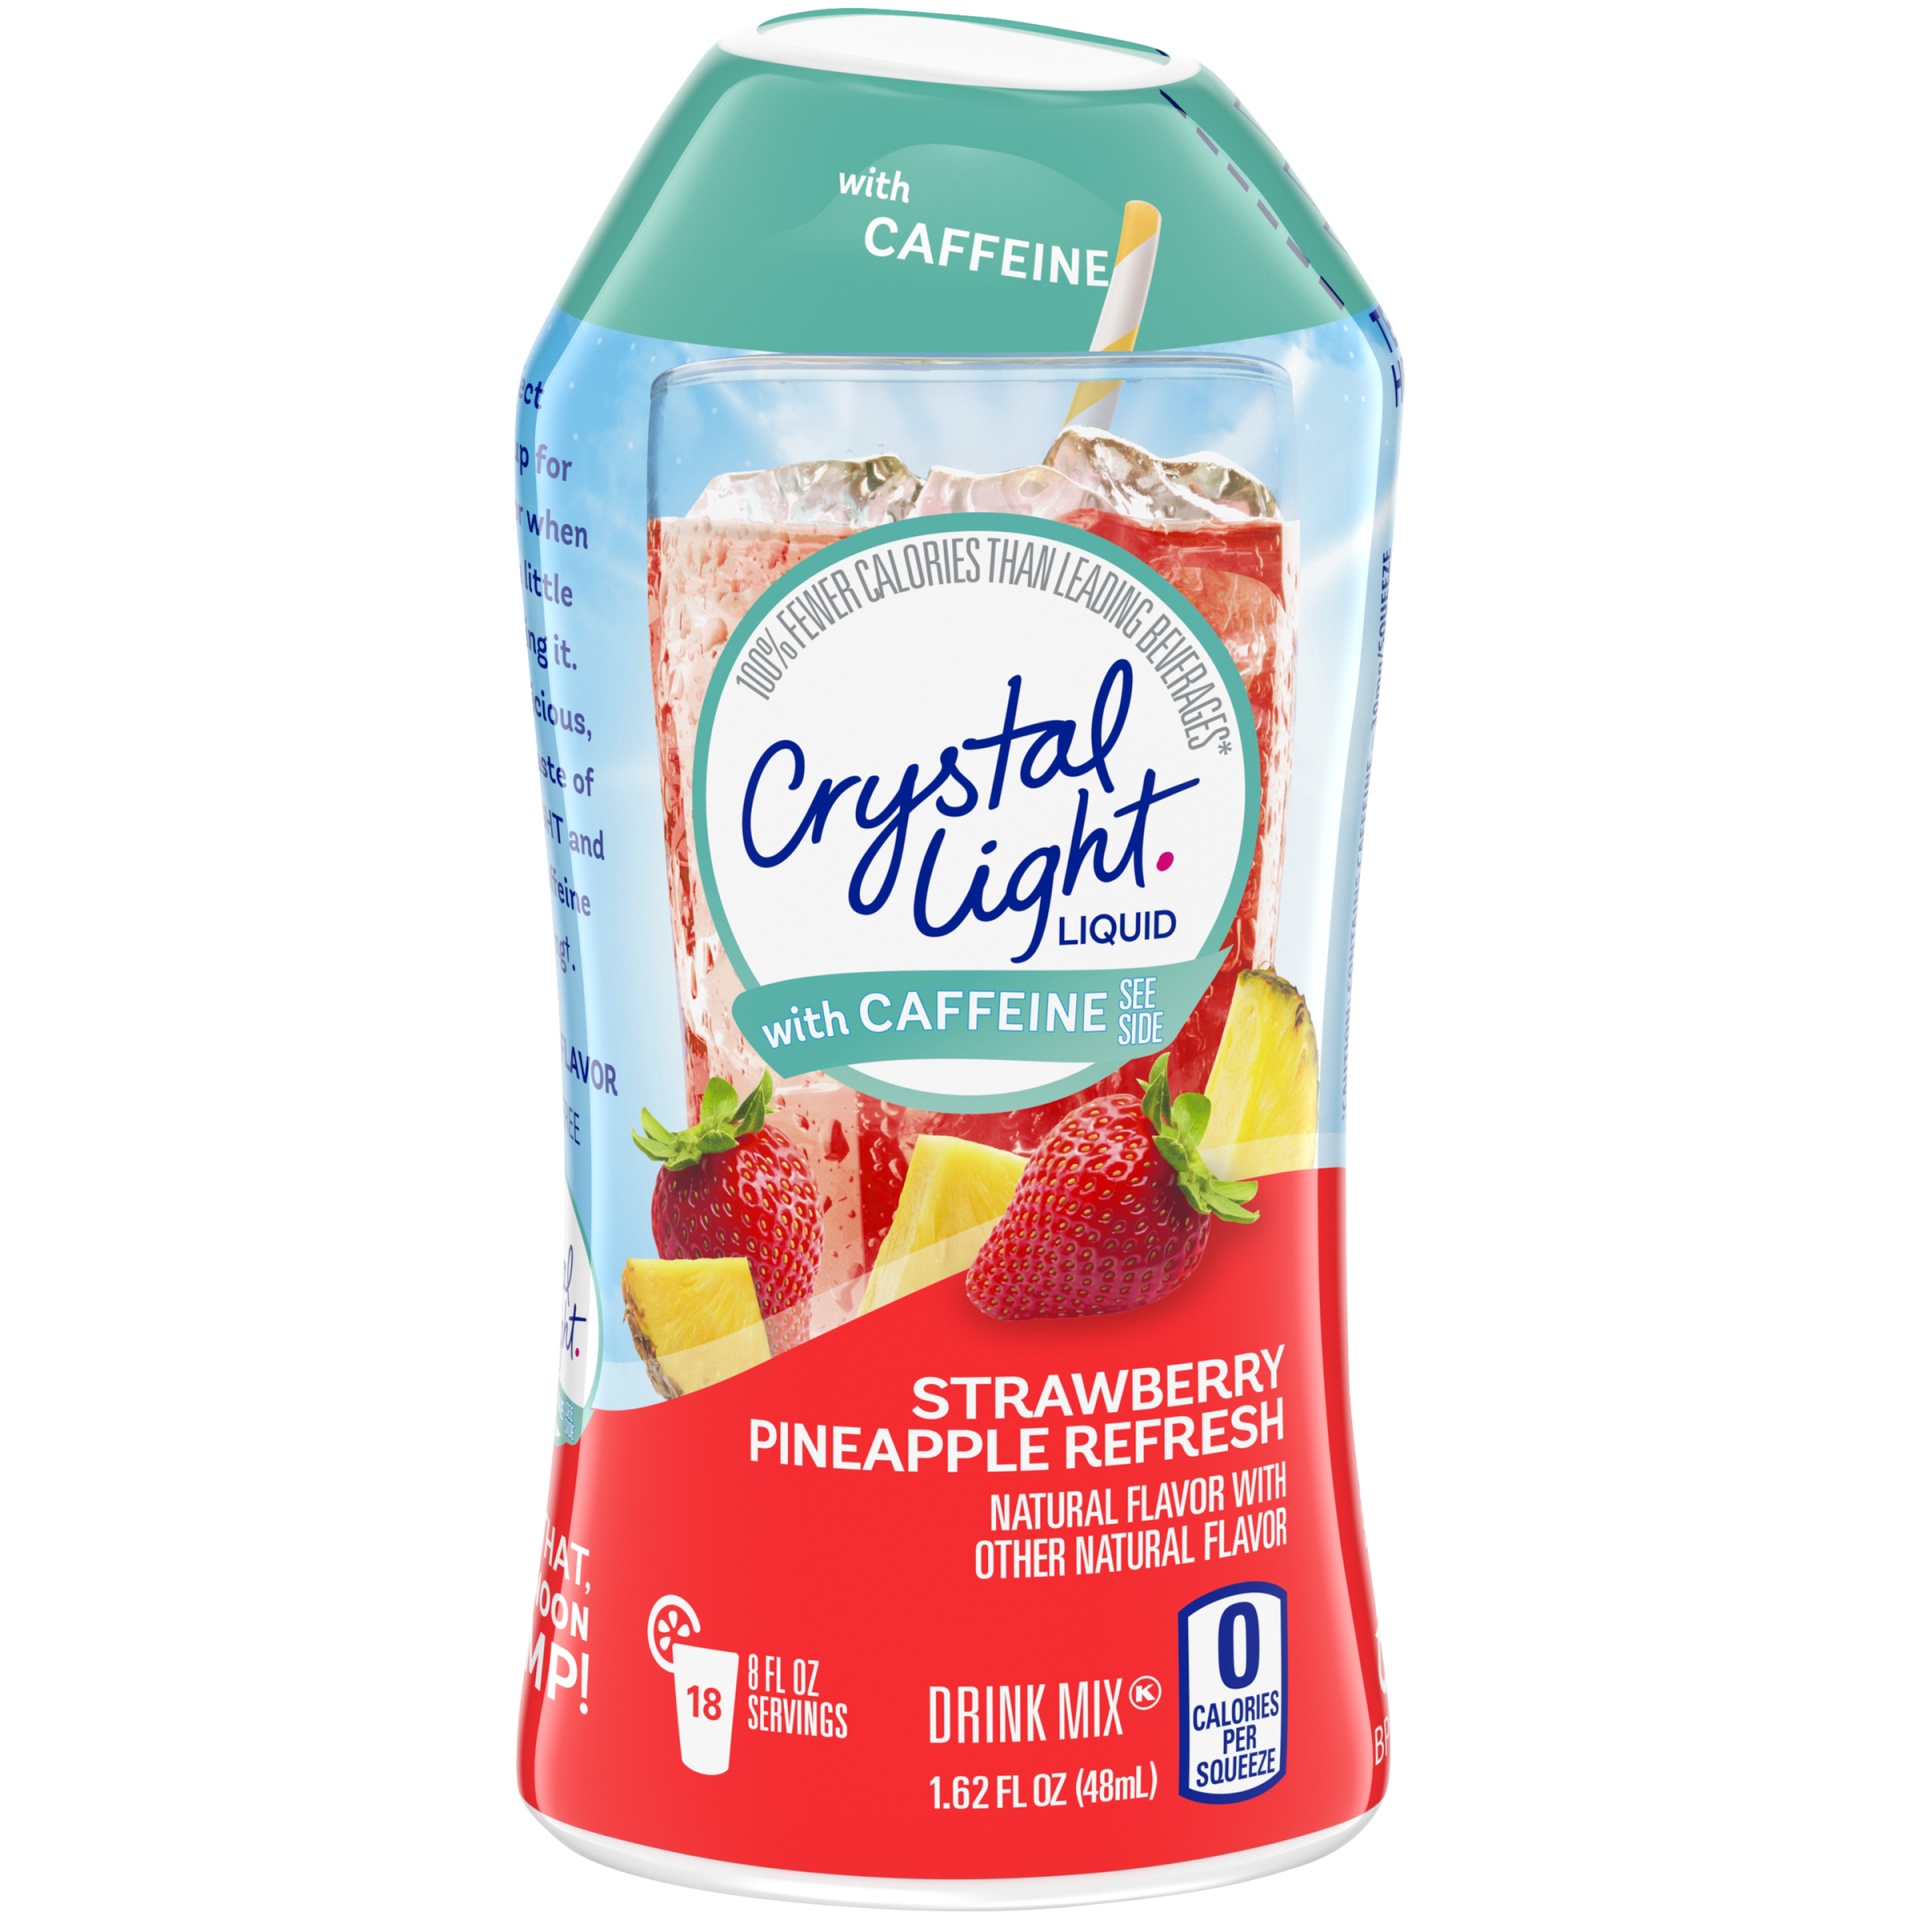 slide 1 of 11, Crystal Light Liquid Strawberry Pineapple Refresh Naturally Flavored Drink Mix with Caffeine, 1.62 oz